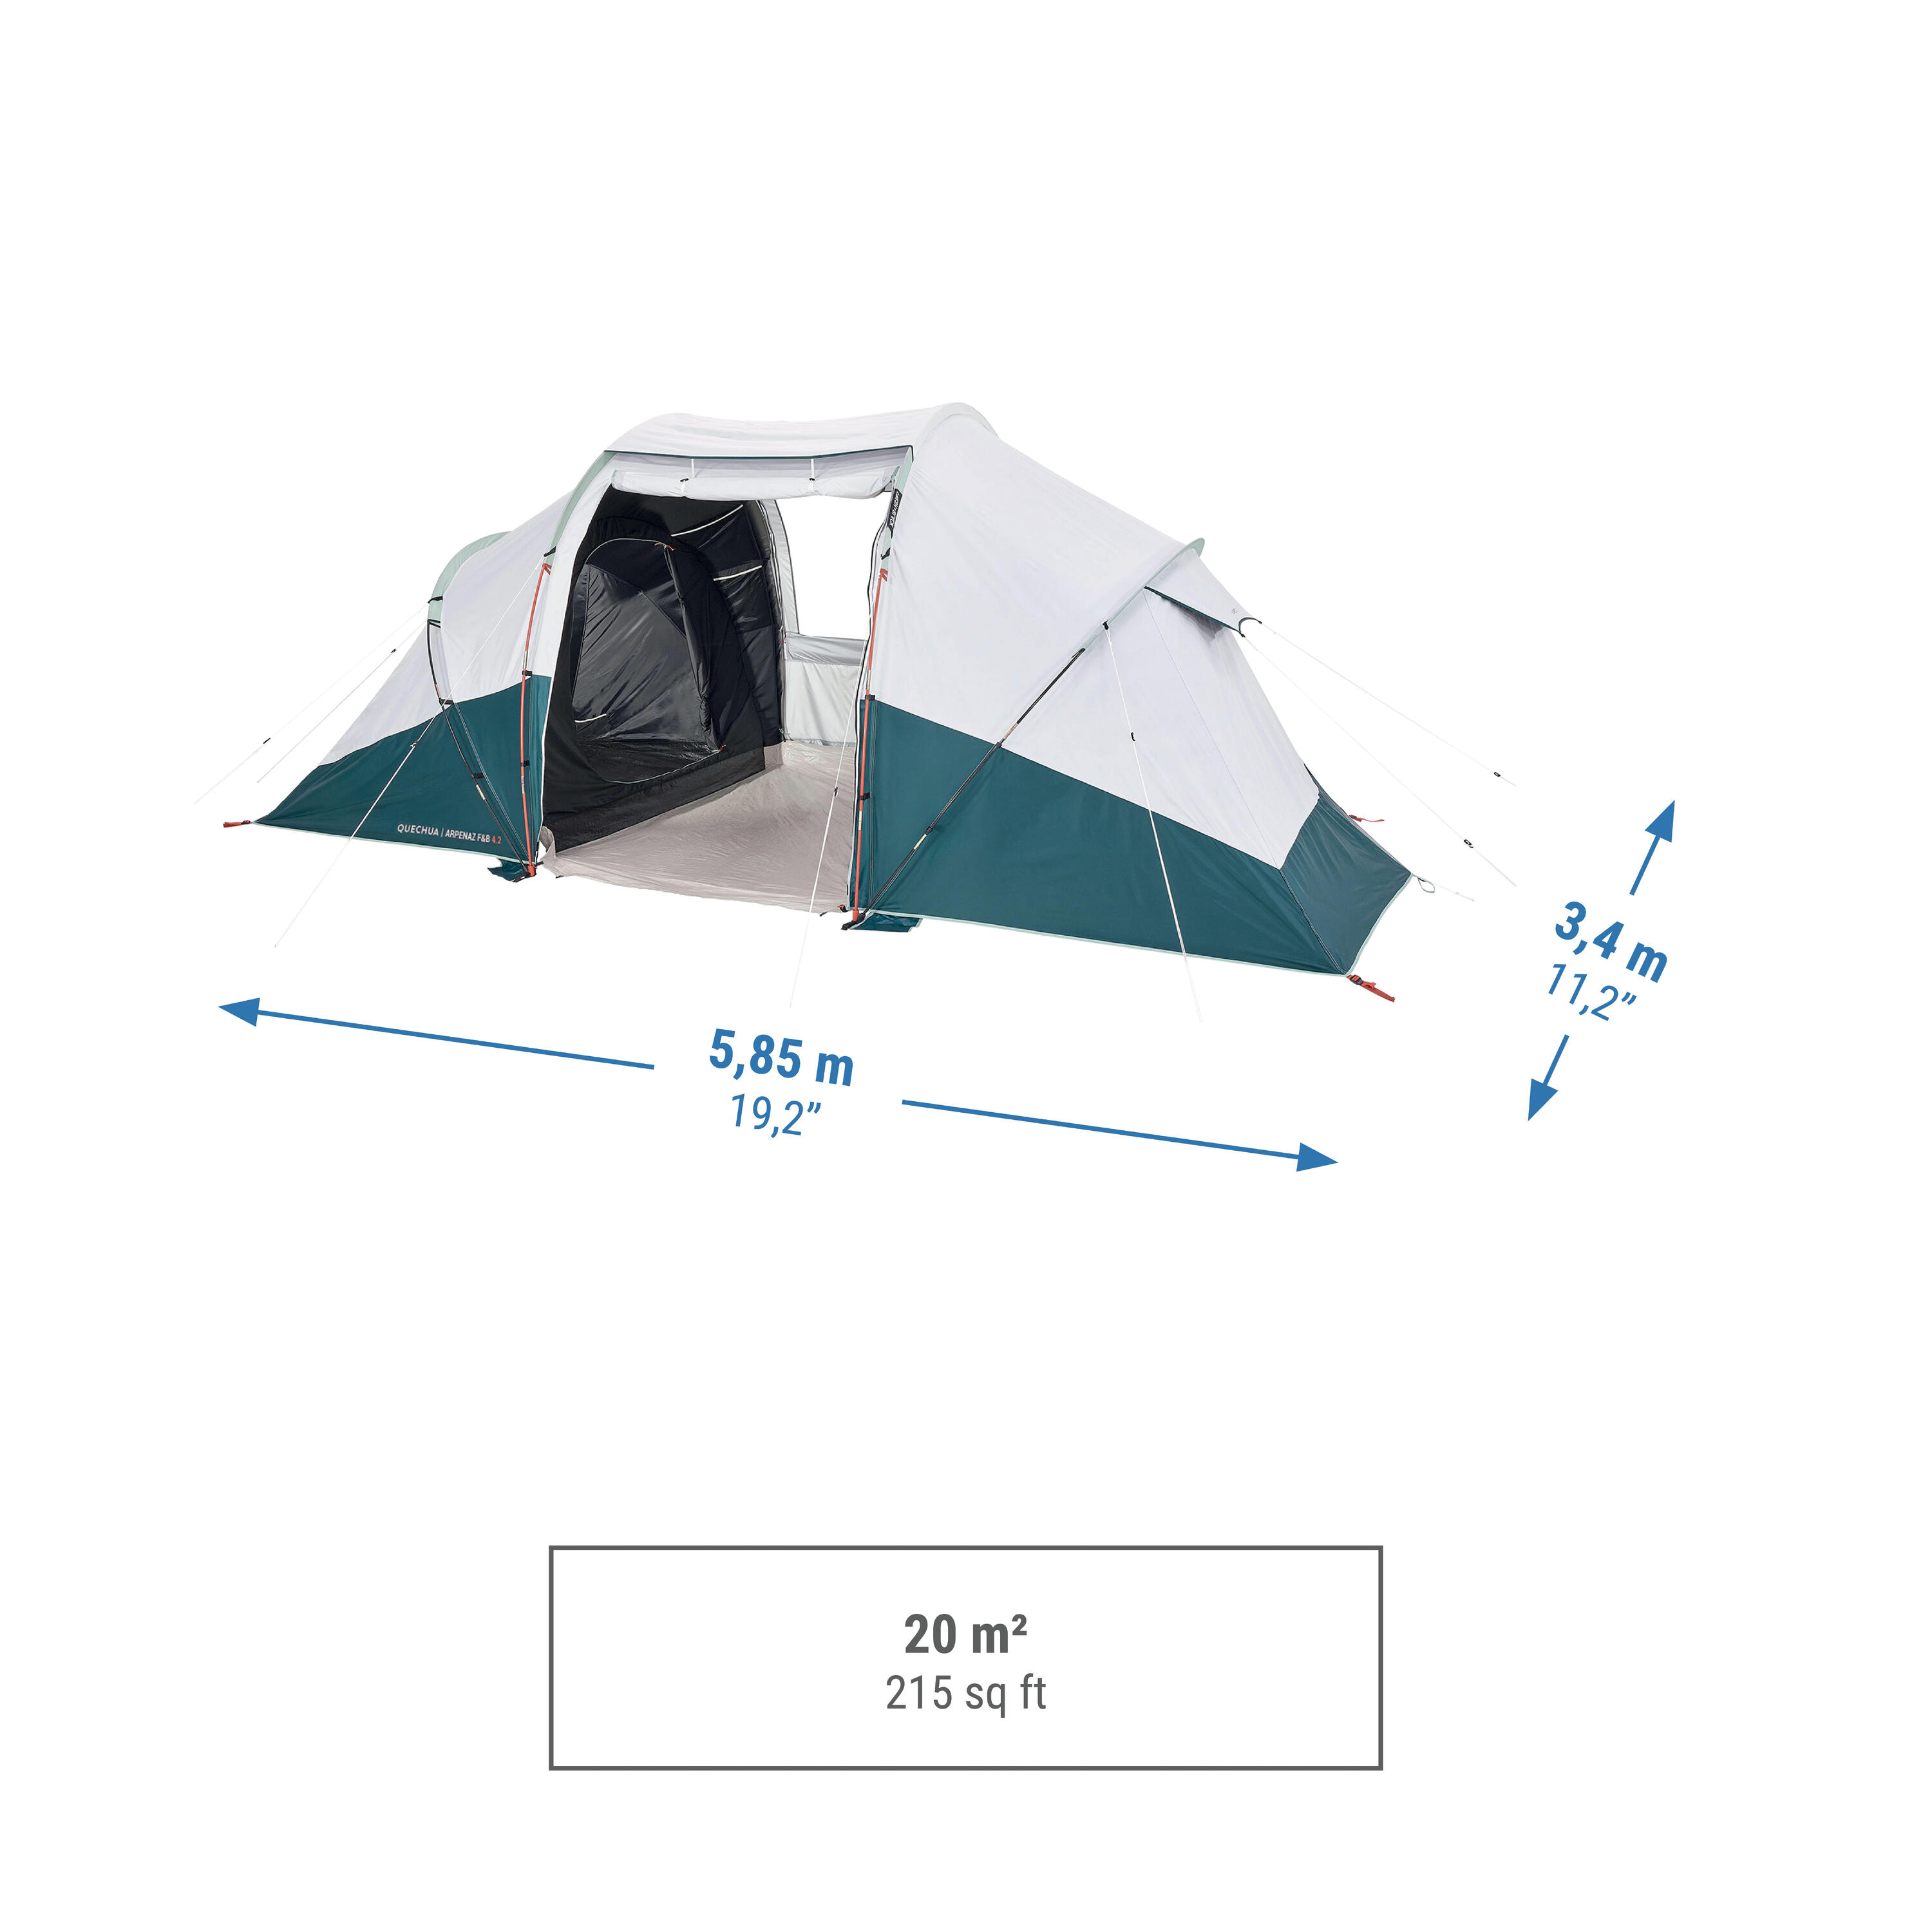 Camping tent with poles - Arpenaz 4.2 F&B - 4 Person - 2 Bedrooms 3/24